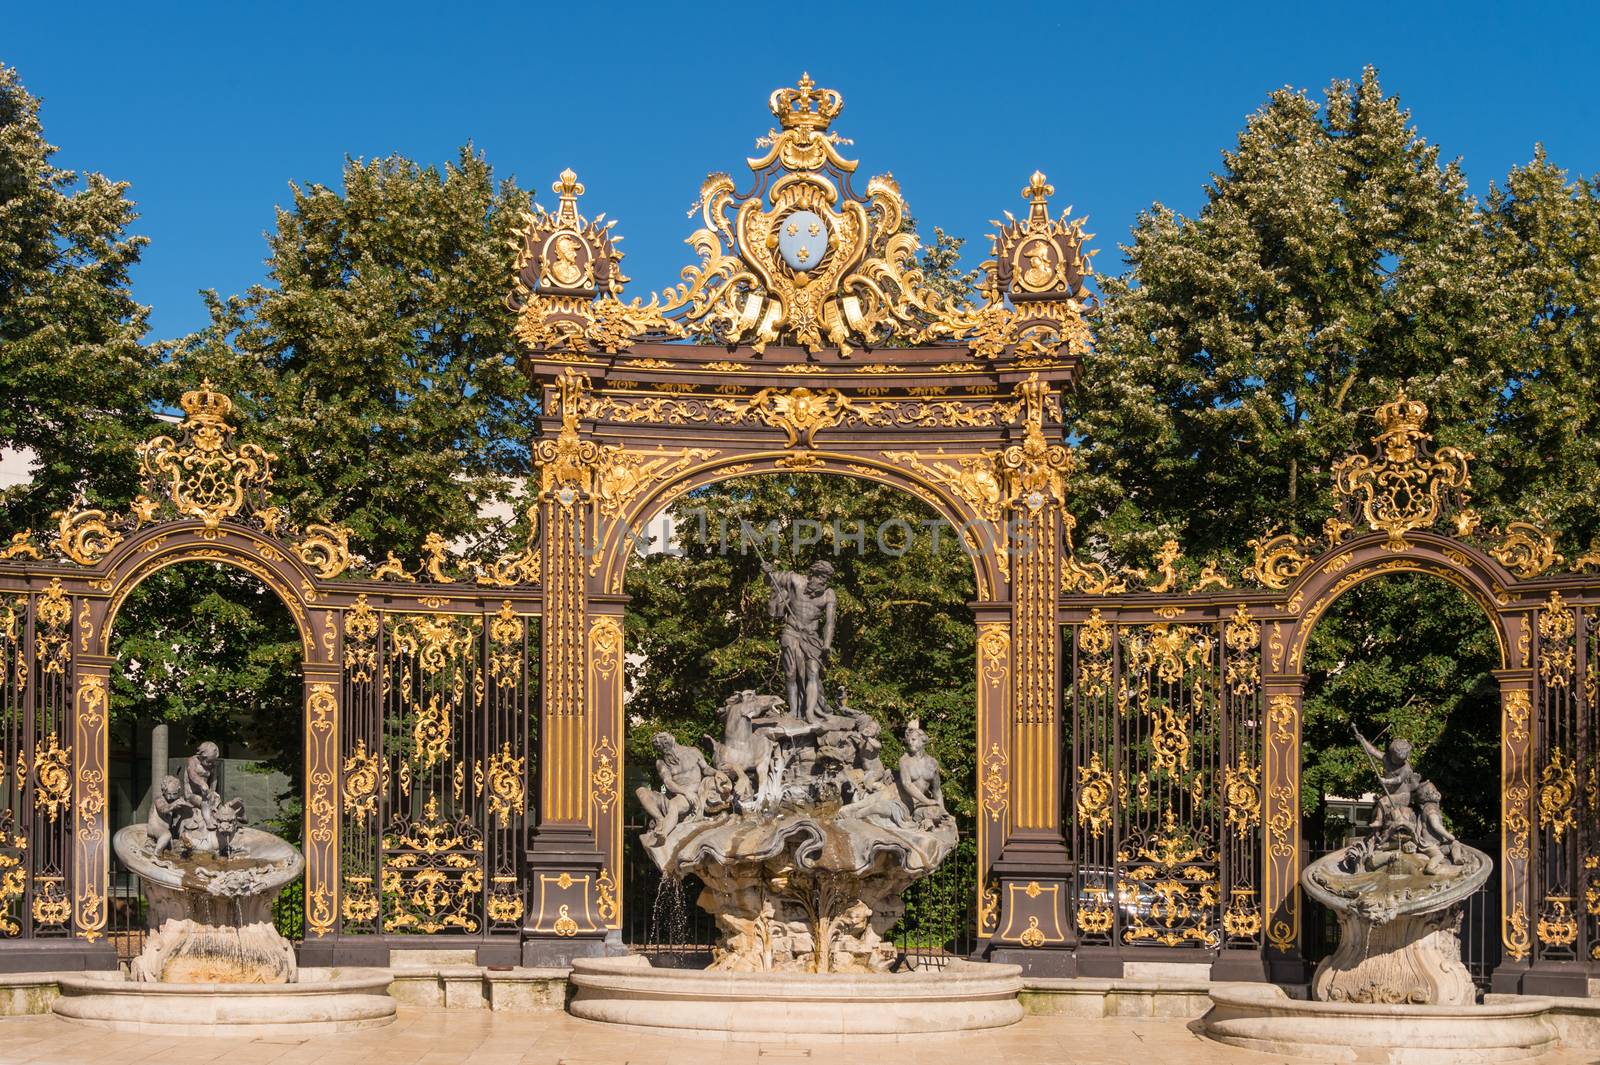 Nancy, France - 22 June 2018: Golden gate to the Place Stanislas square and Neptune Fountain in Nancy, France.